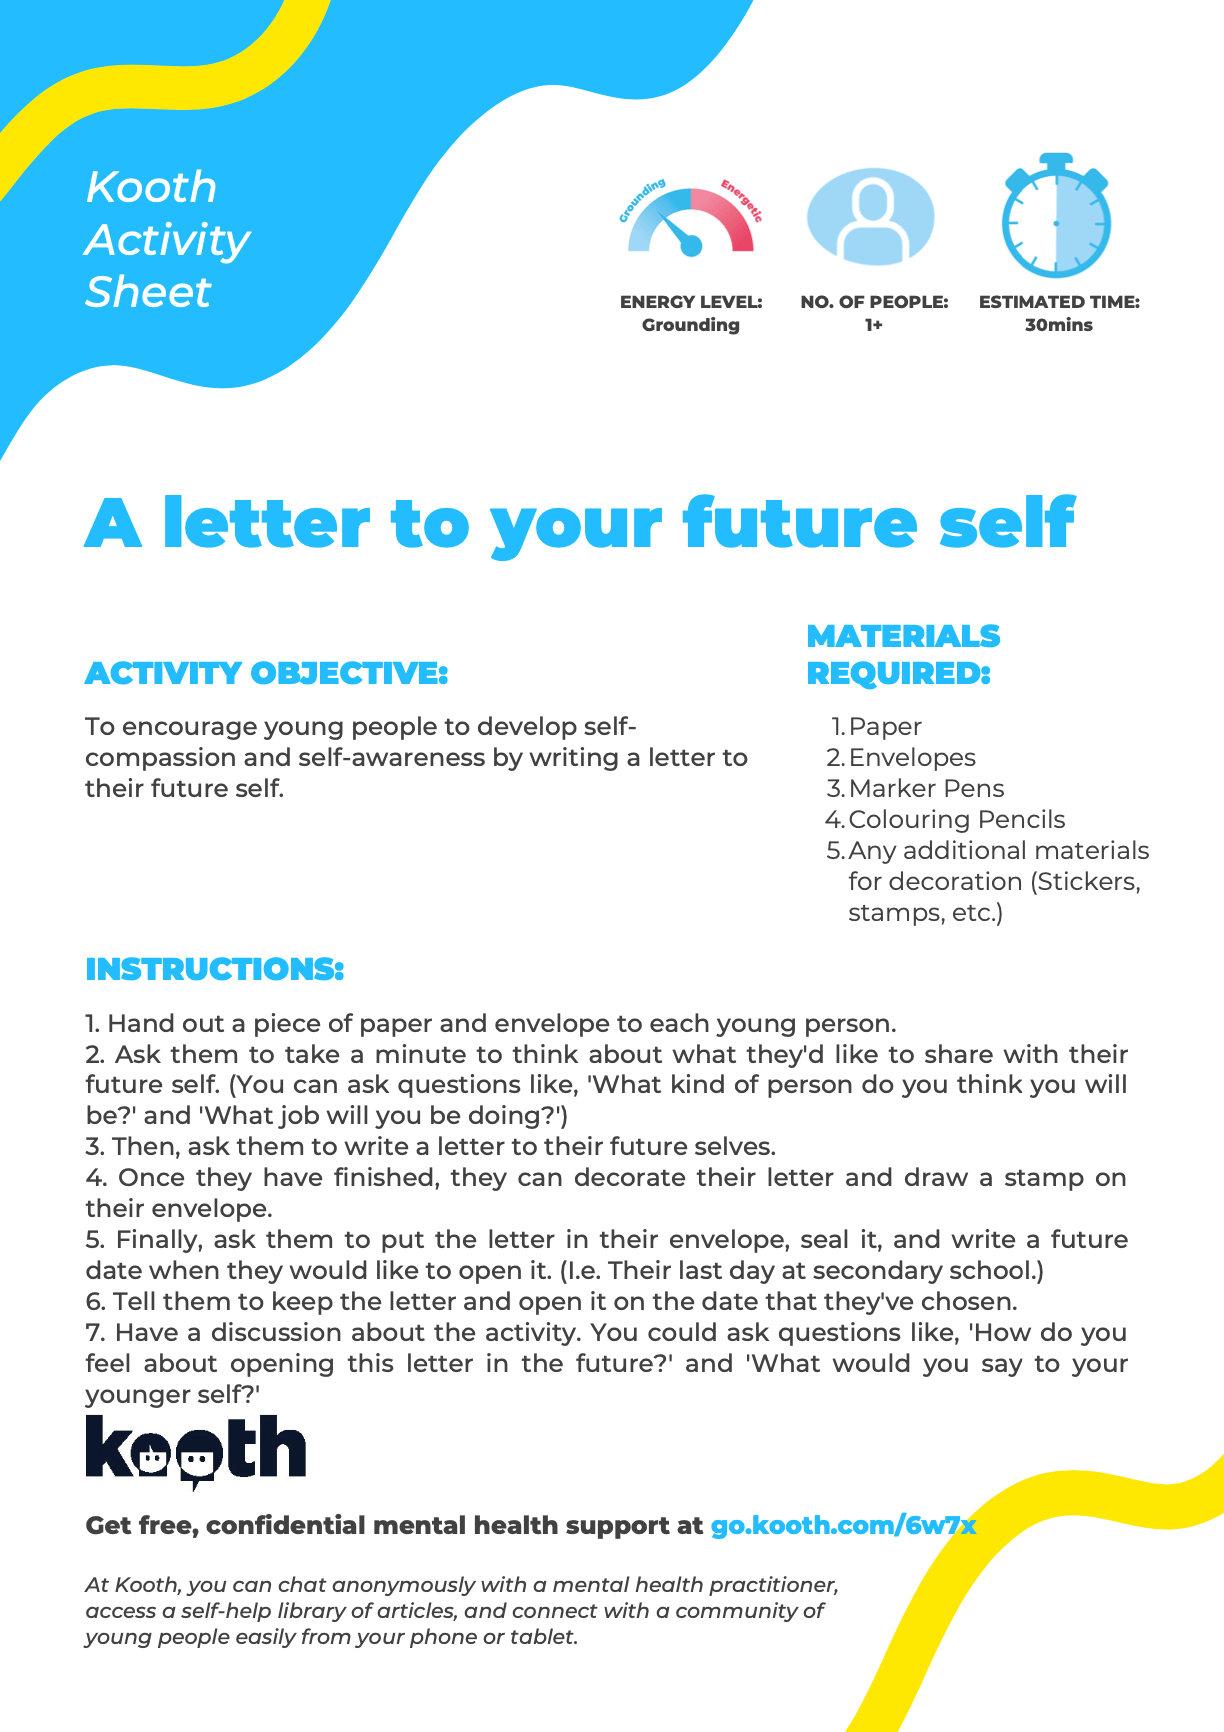 Student activity sheet thumbnail - a letter to your future self (1)